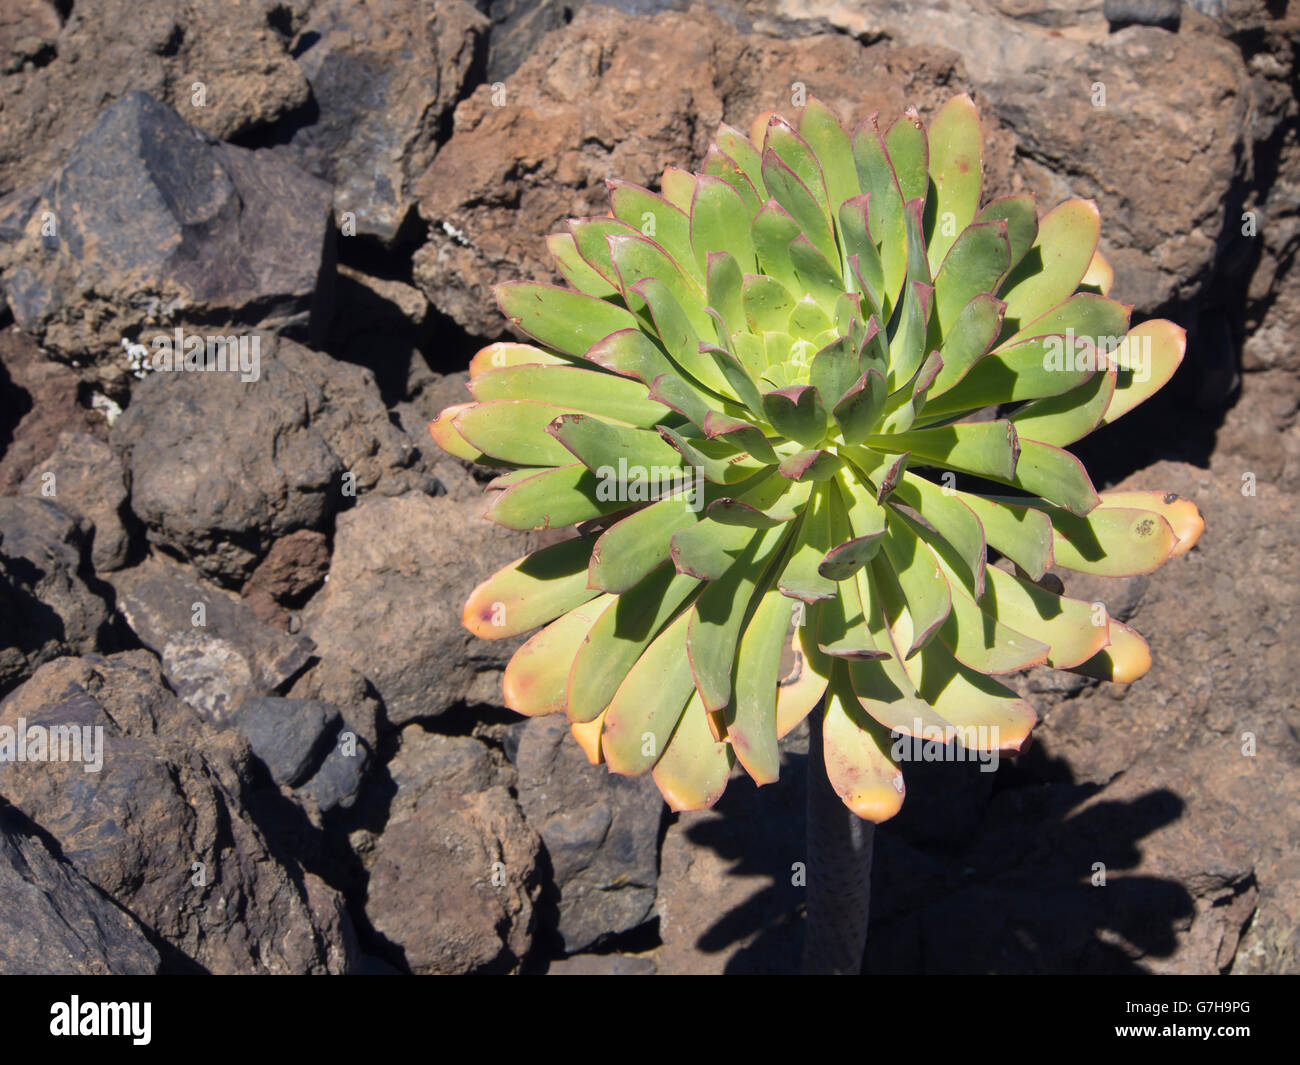 Aeonium pseudourbicum (probably) a succulent growing in the lava fields of Tenerife Canary Islands Spain near Arguayo Stock Photo